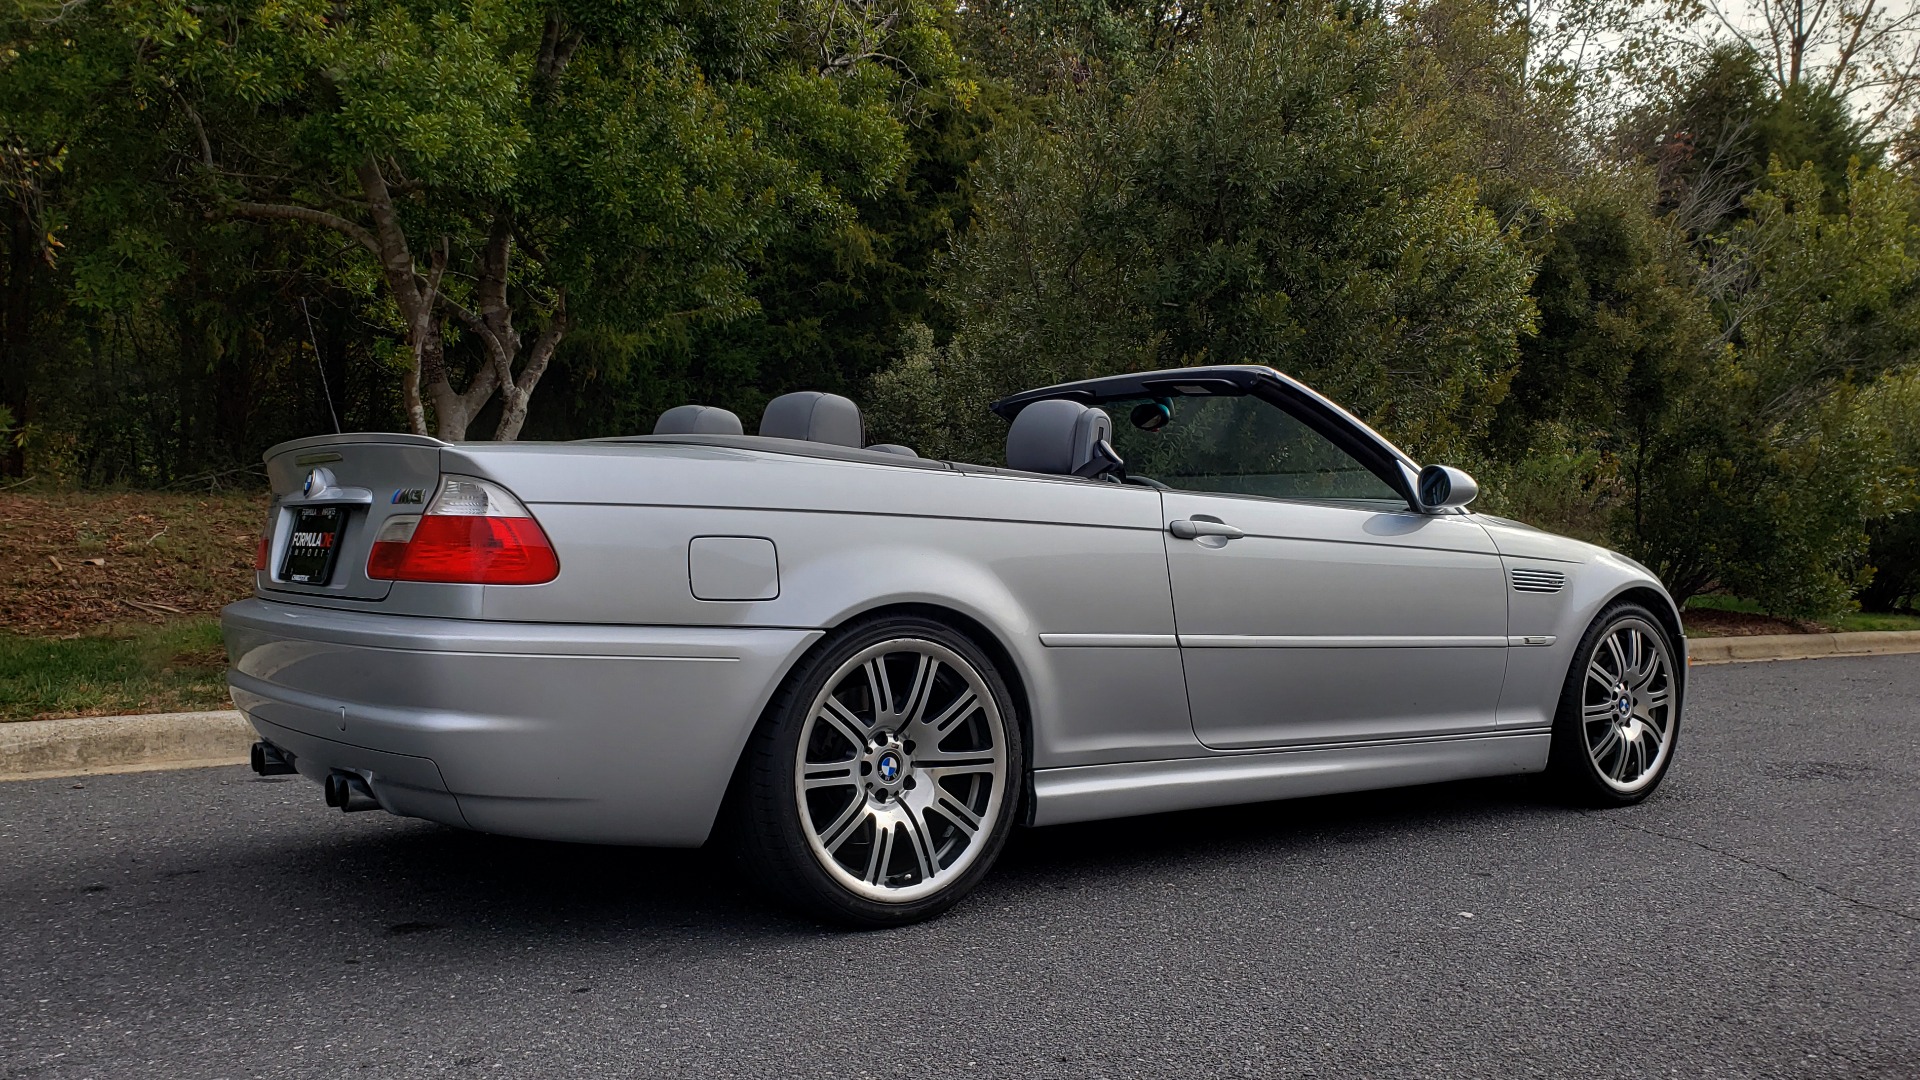 Used 2002 BMW M3 CONVERTIBLE / 6-SPD MAN / XENON / 19IN WHEELS for sale Sold at Formula Imports in Charlotte NC 28227 5